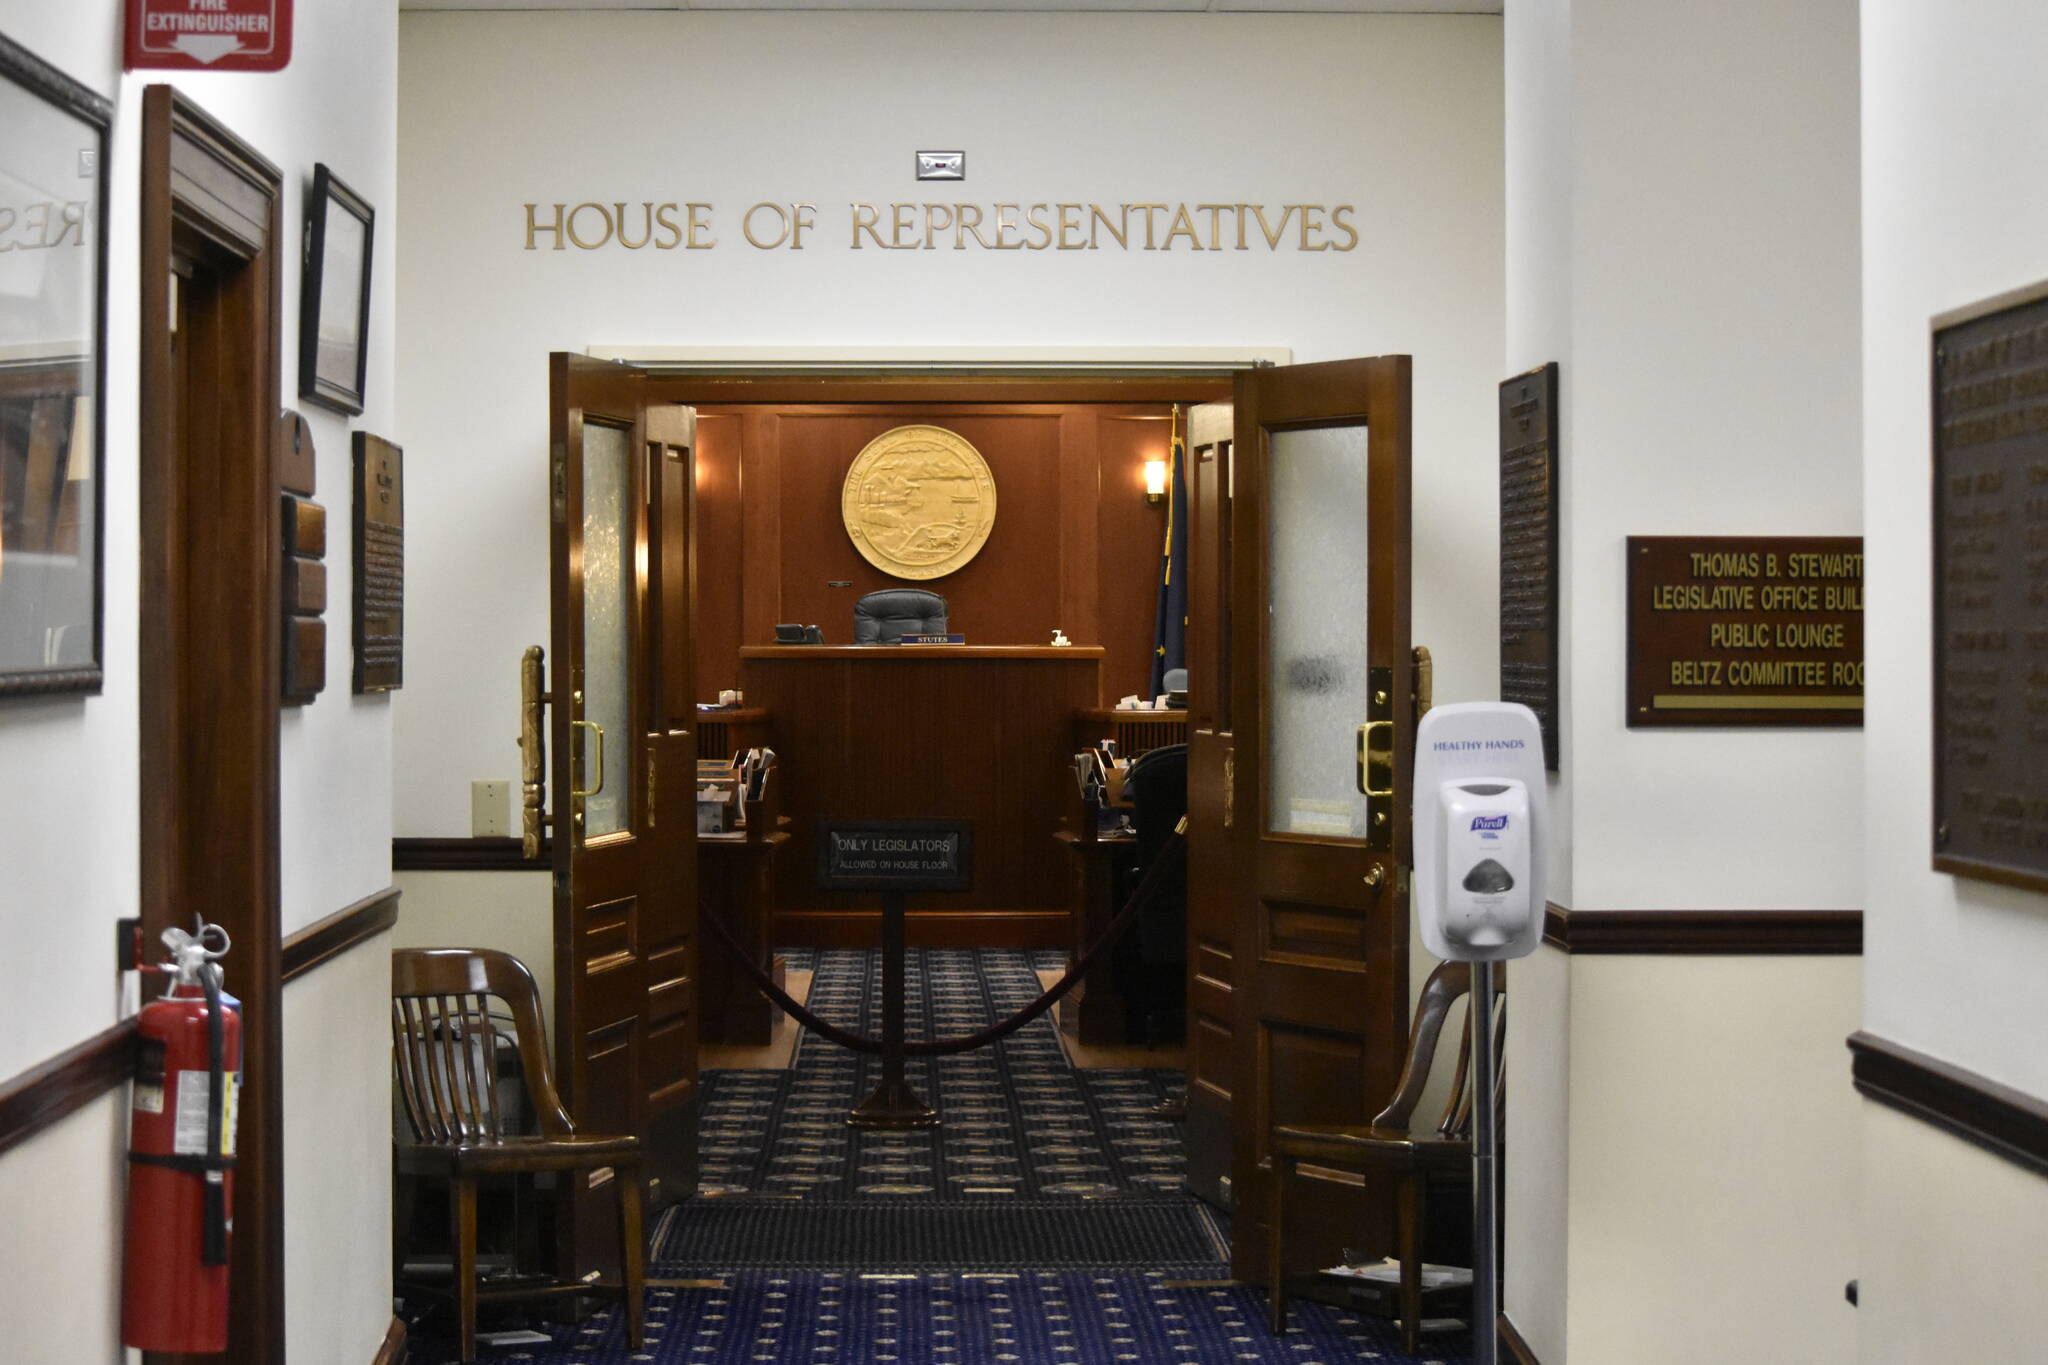 Members of the Alaska House of Representatives has 87 amendments submitted to the state's operating budget bill and intends to spend the rest of the week in floor session working through them. (Peter Segall / Juneau Empire file)